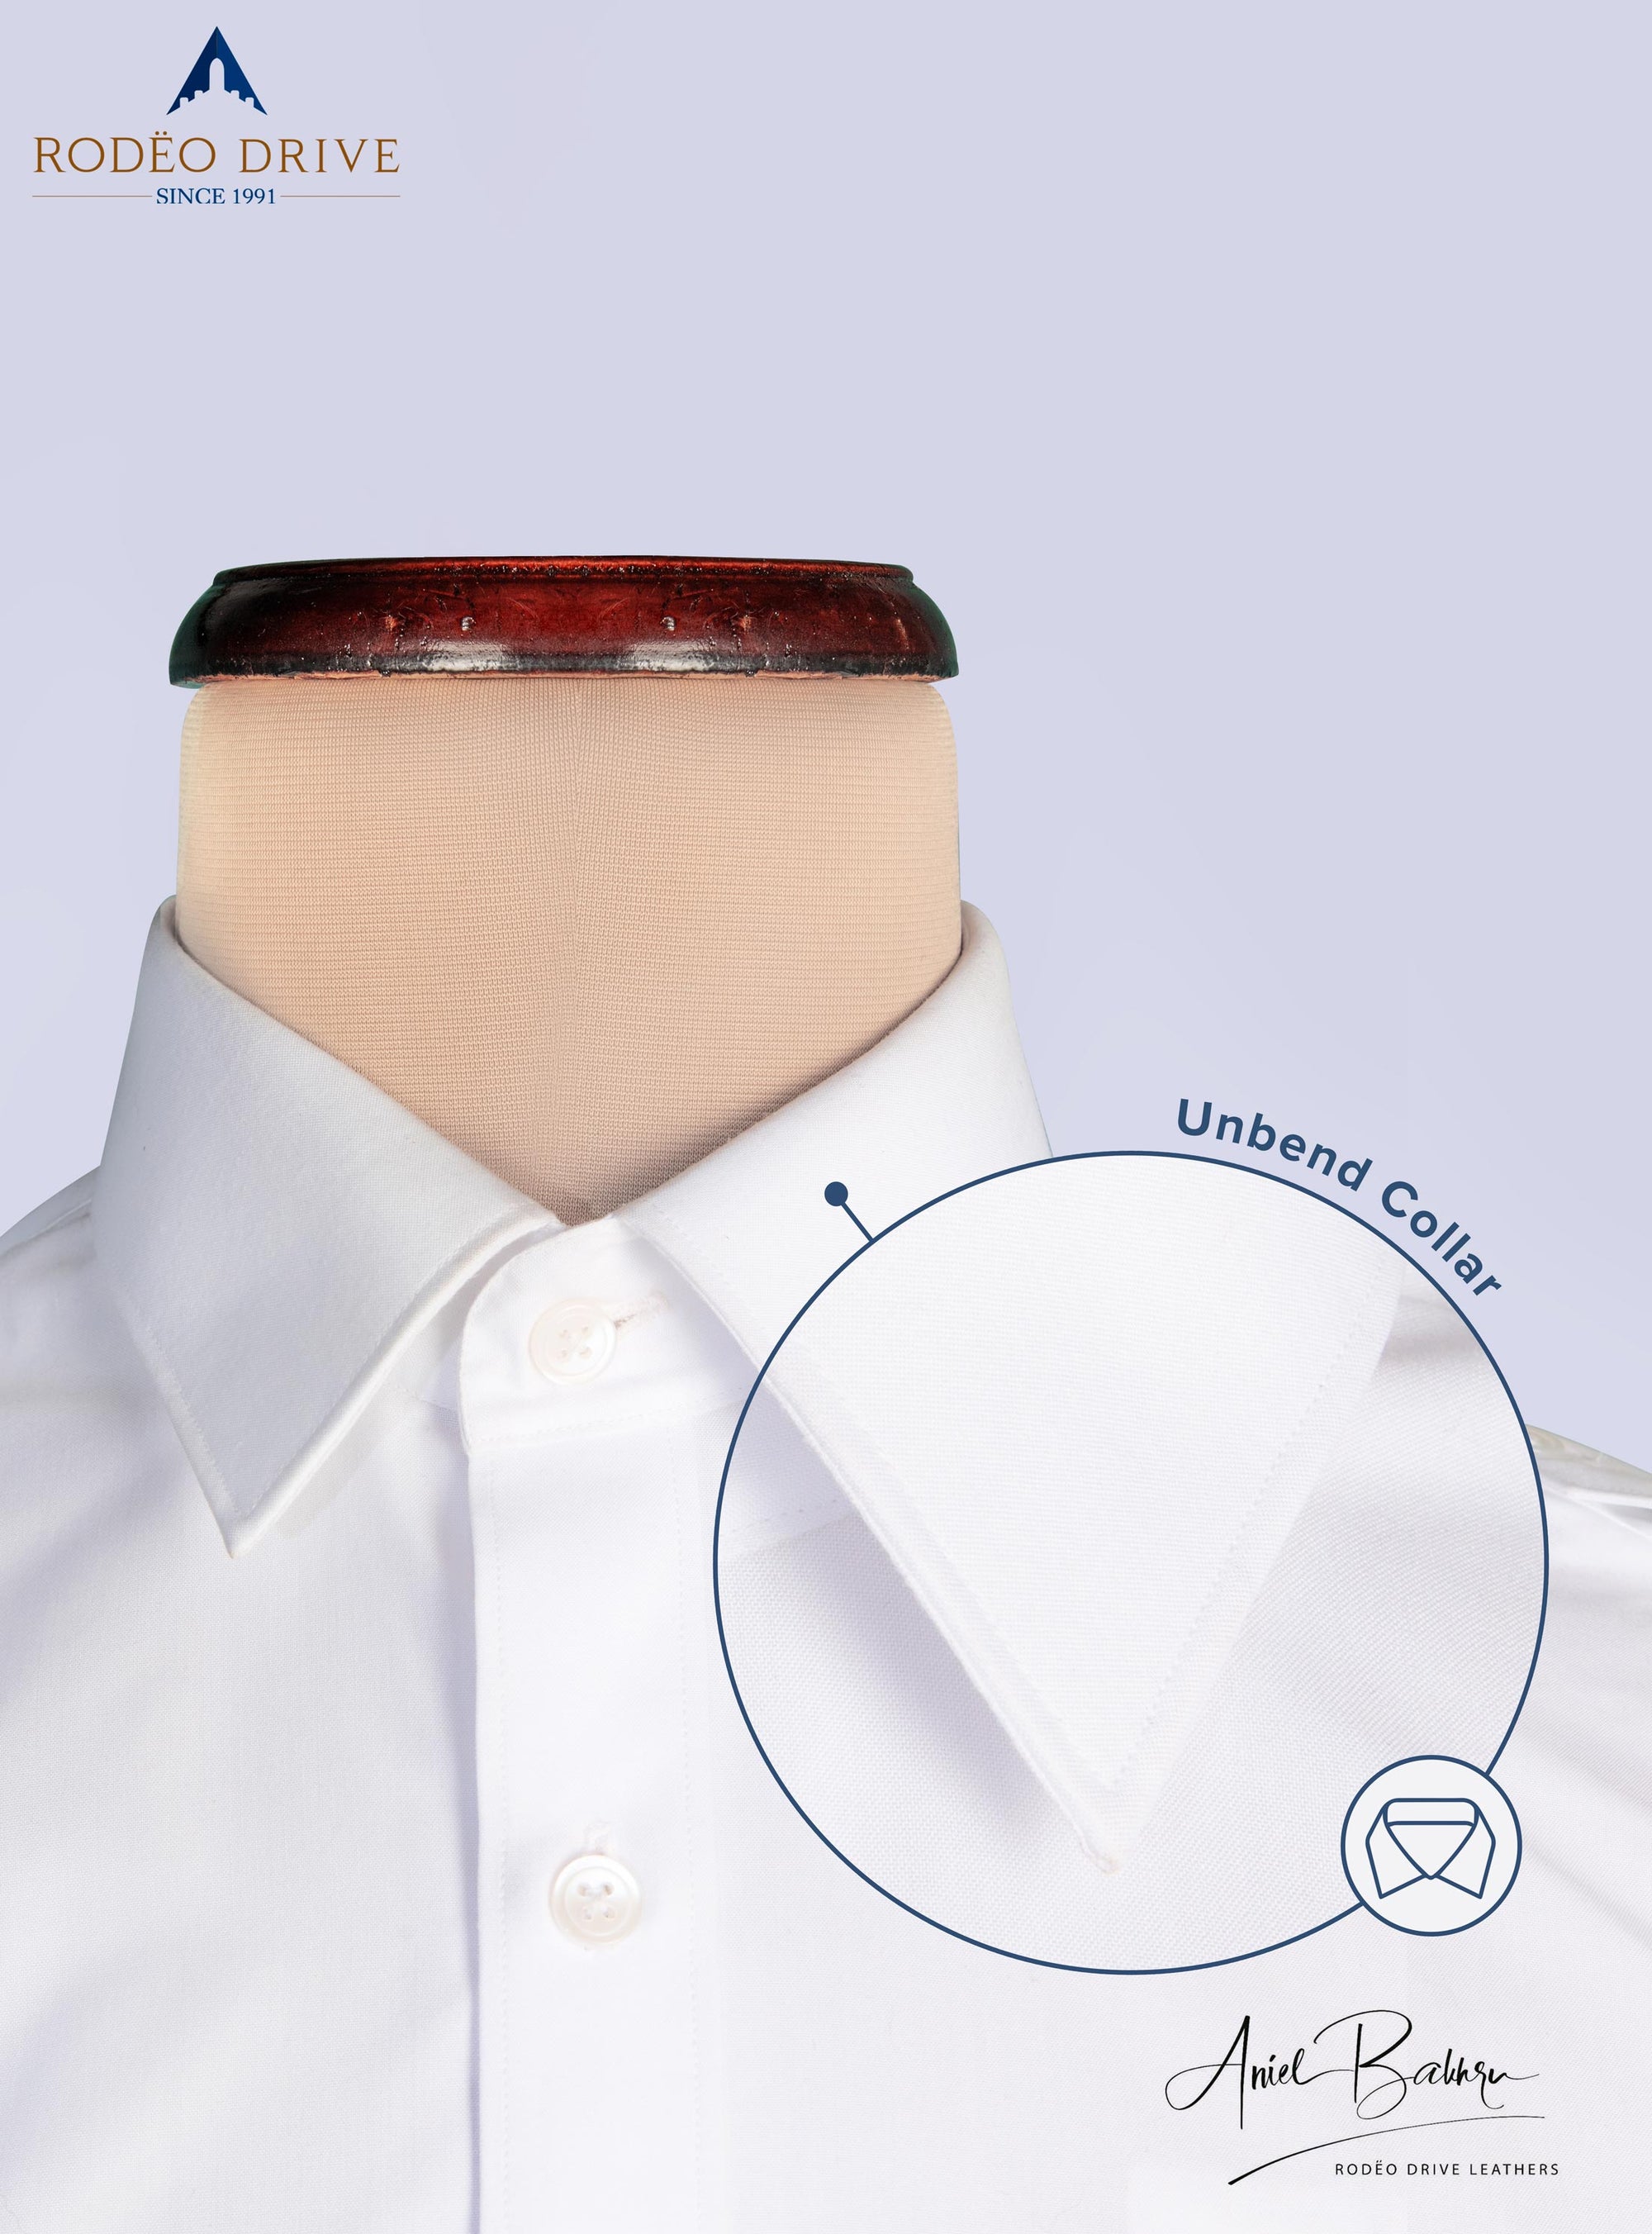 Front image depicting Unbend collar. Unbend collar is a must for pilot